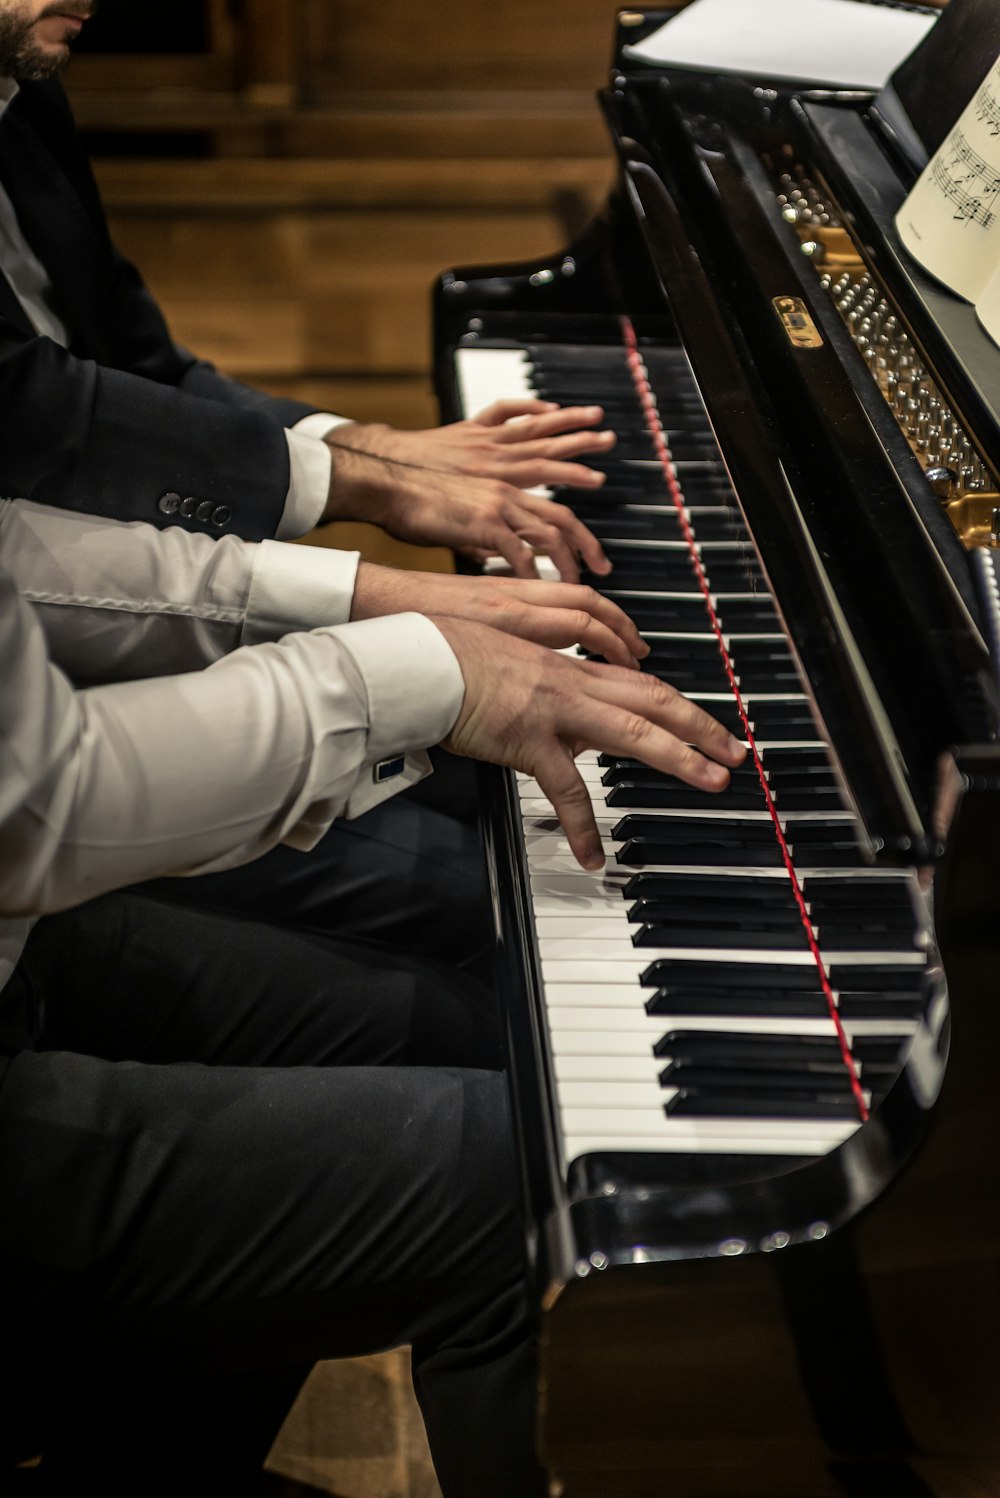 two people sitting at a piano with their hands on the keys